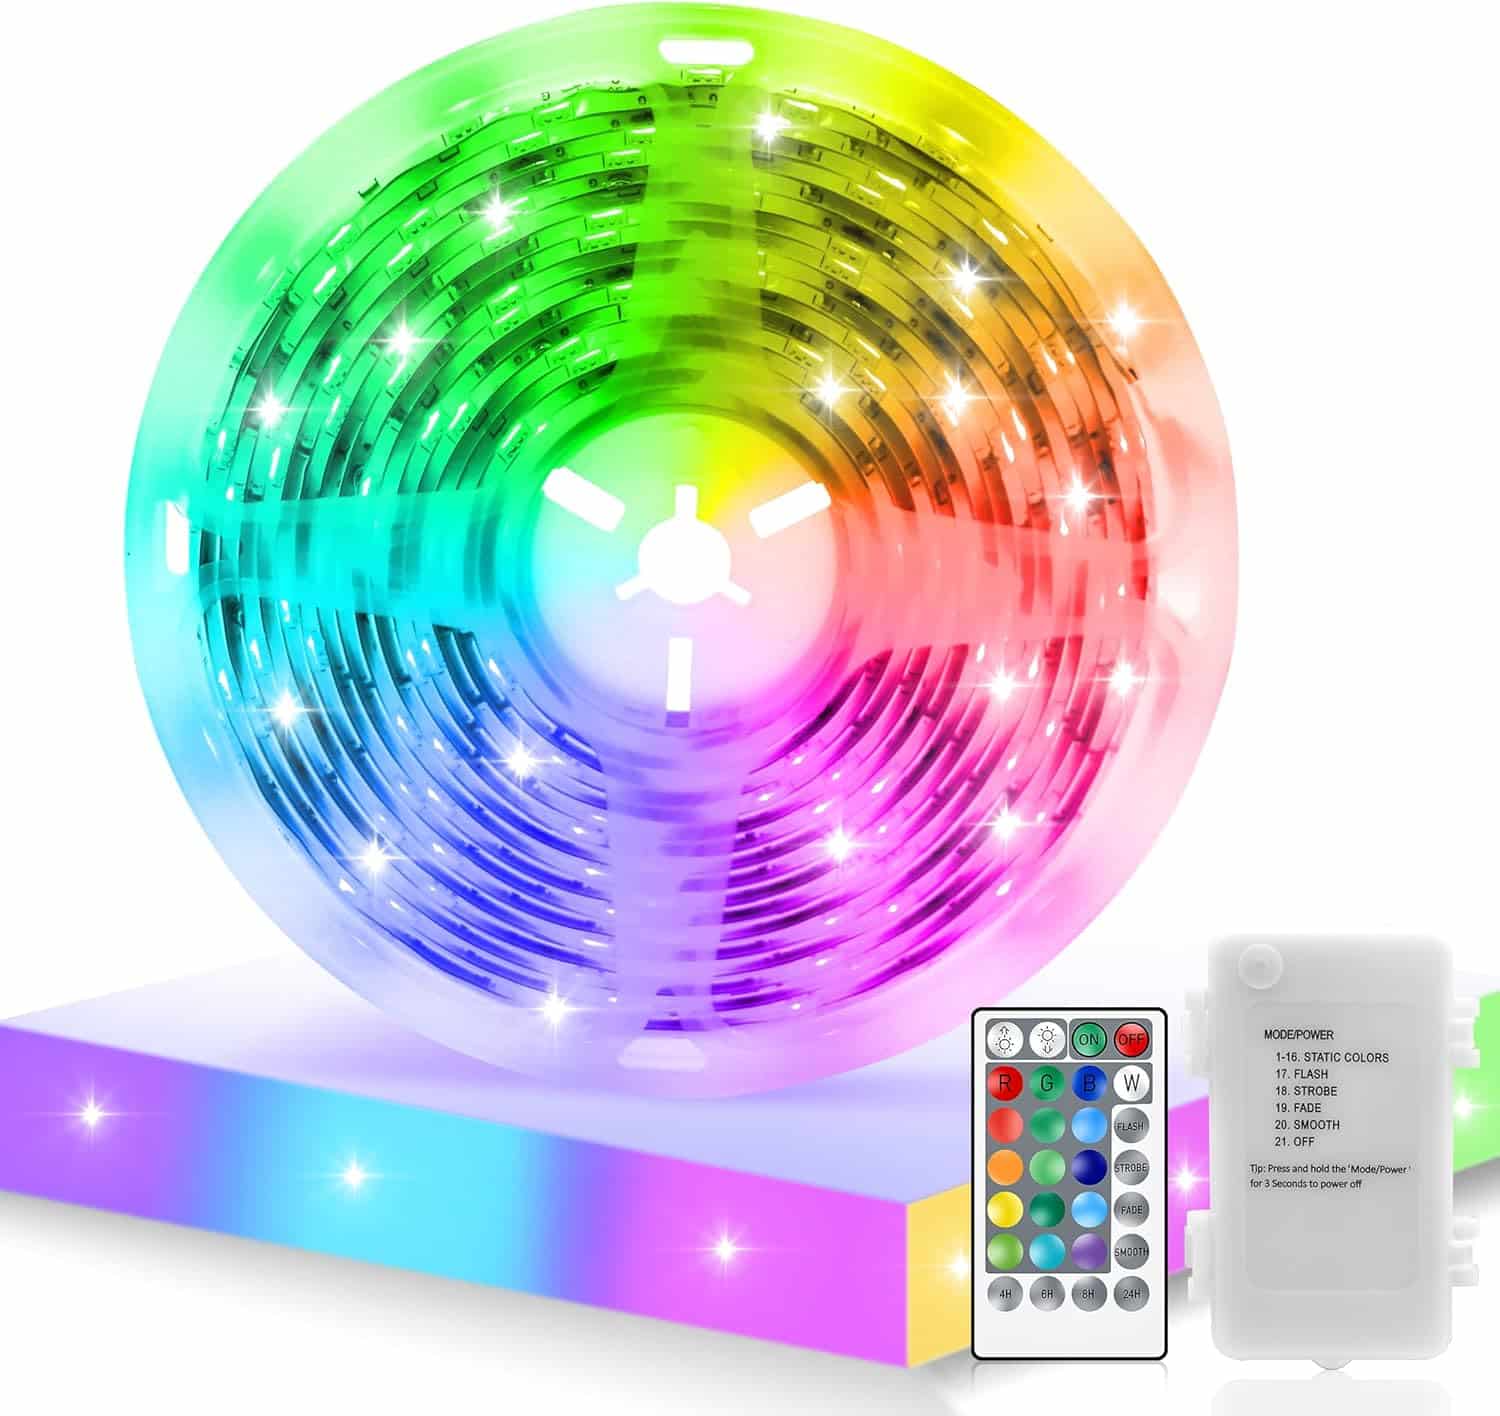 RGB LED Strip Lights Battery Powered, 16.4FT 150 LED 16 Color Changing Tape Lights with Remote Controller Timer Dimmable Self-Adhesive Waterproof LED Lights for Dorm Bedroom Cabinet Bar (C Cell)